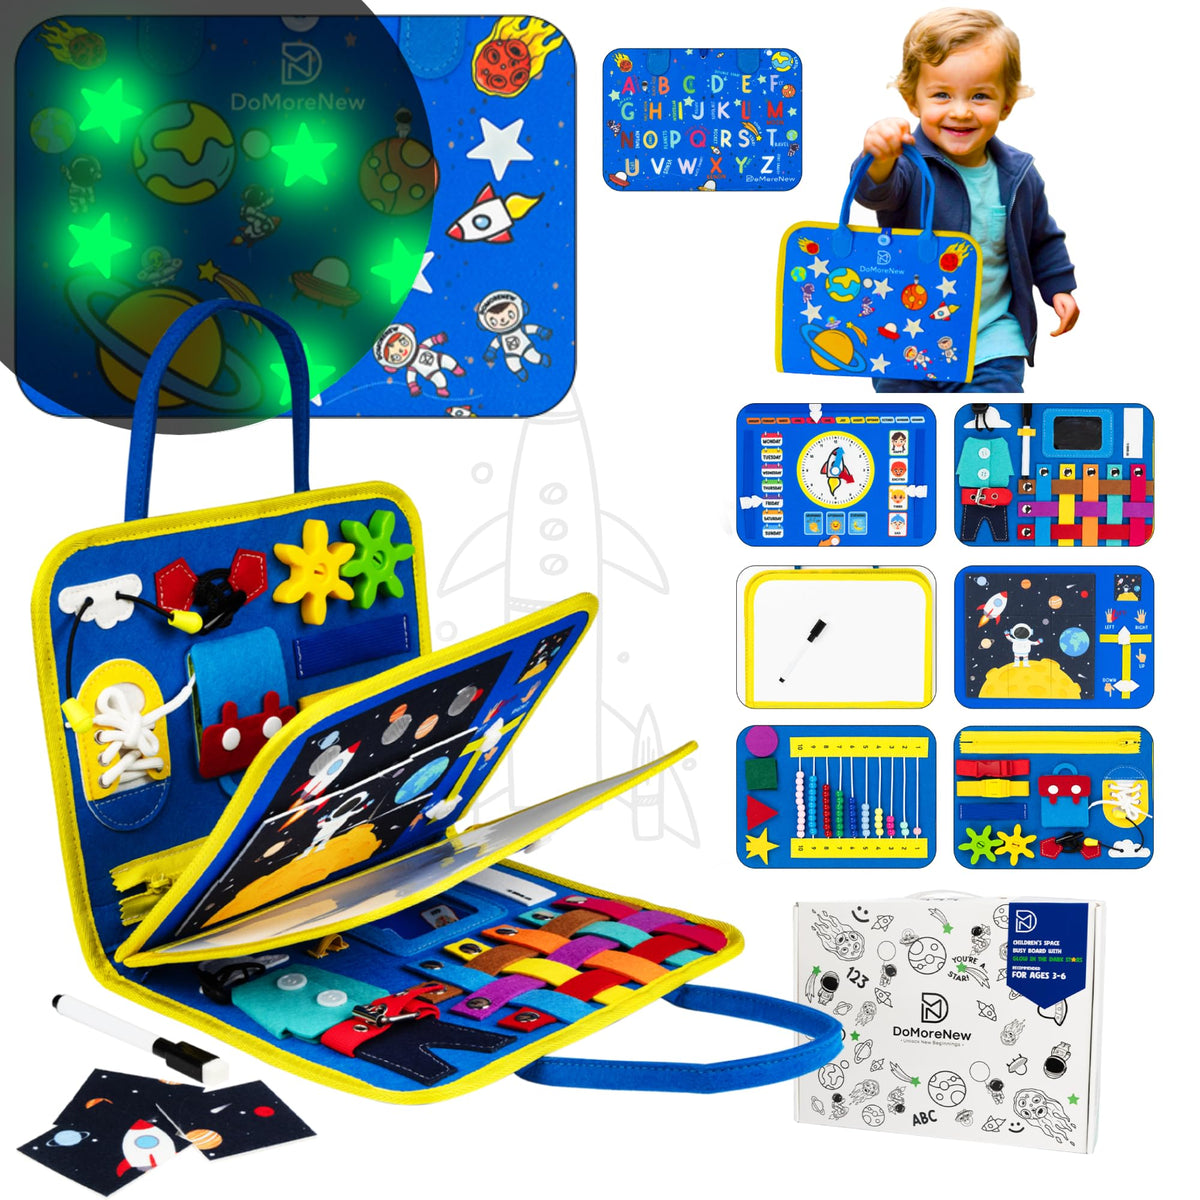 DoMoreNew Busy Board with Super Glow in the Dark Stars and +40 activities - for Baby and Toddlers of ages 2+, Educational Learning Montessori Busy Book Toy with Whiteboard, Mirror, and Gift Box.